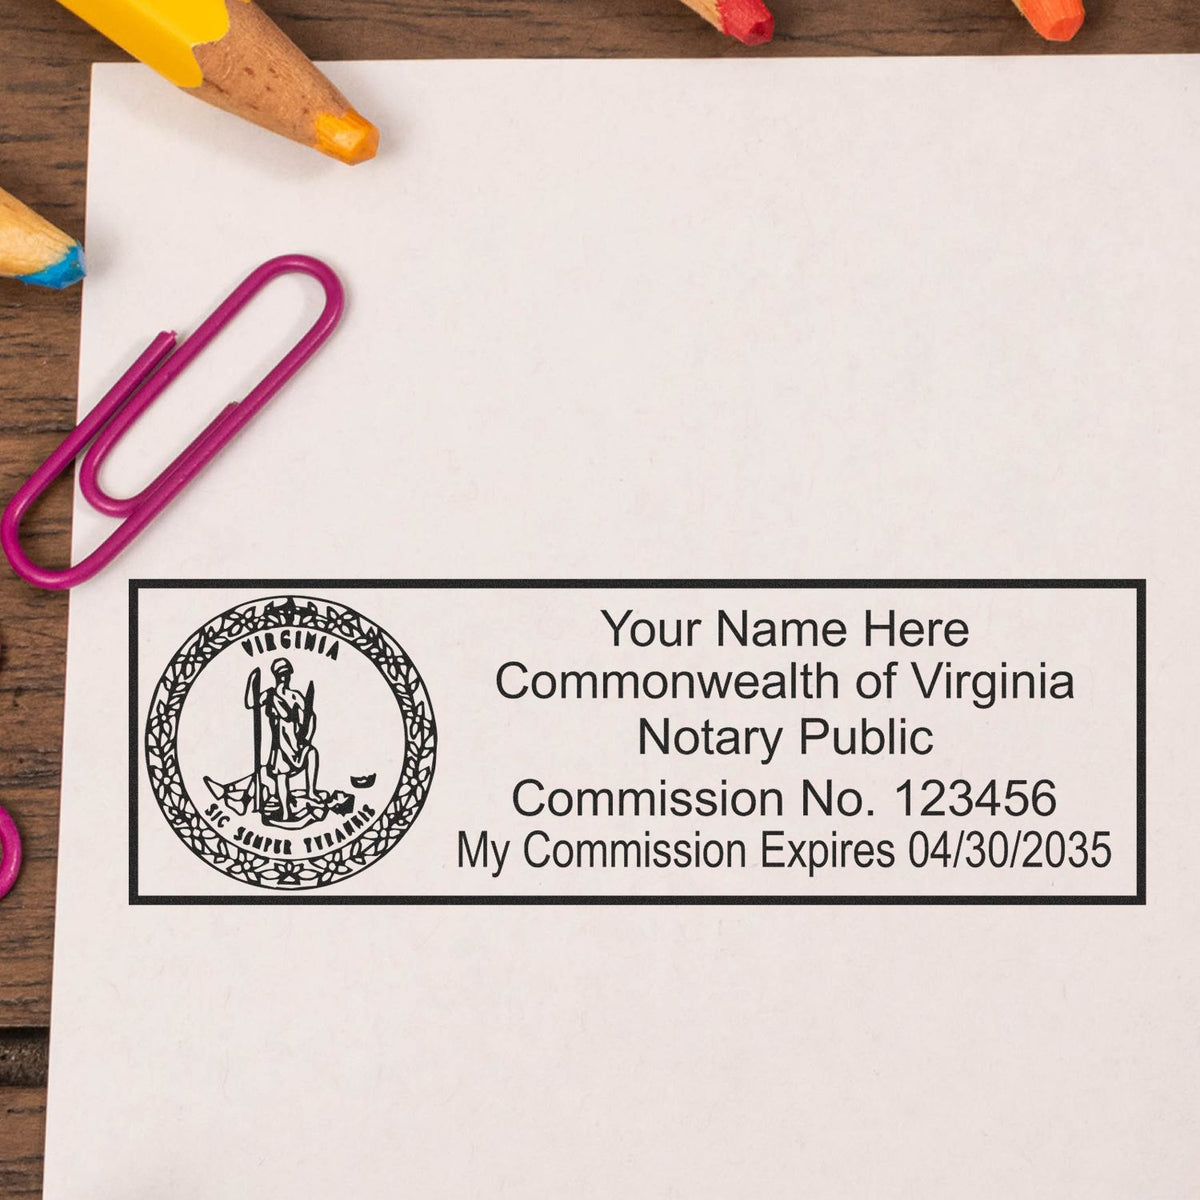 This paper is stamped with a sample imprint of the Super Slim Virginia Notary Public Stamp, signifying its quality and reliability.